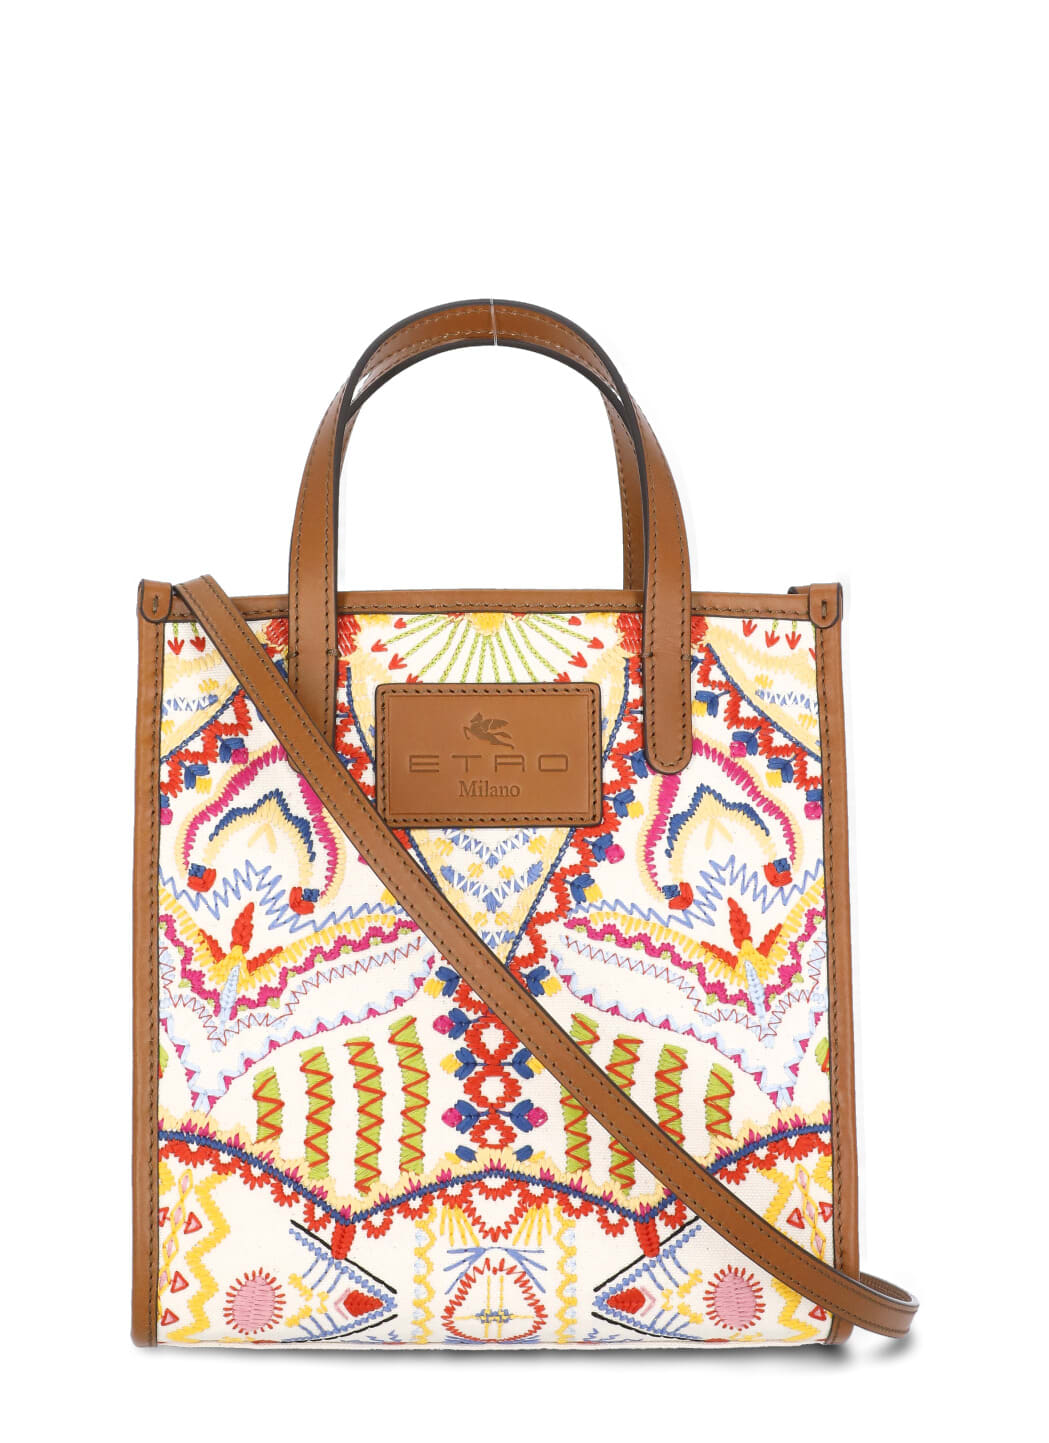 Etro Floral Embroideries Bag